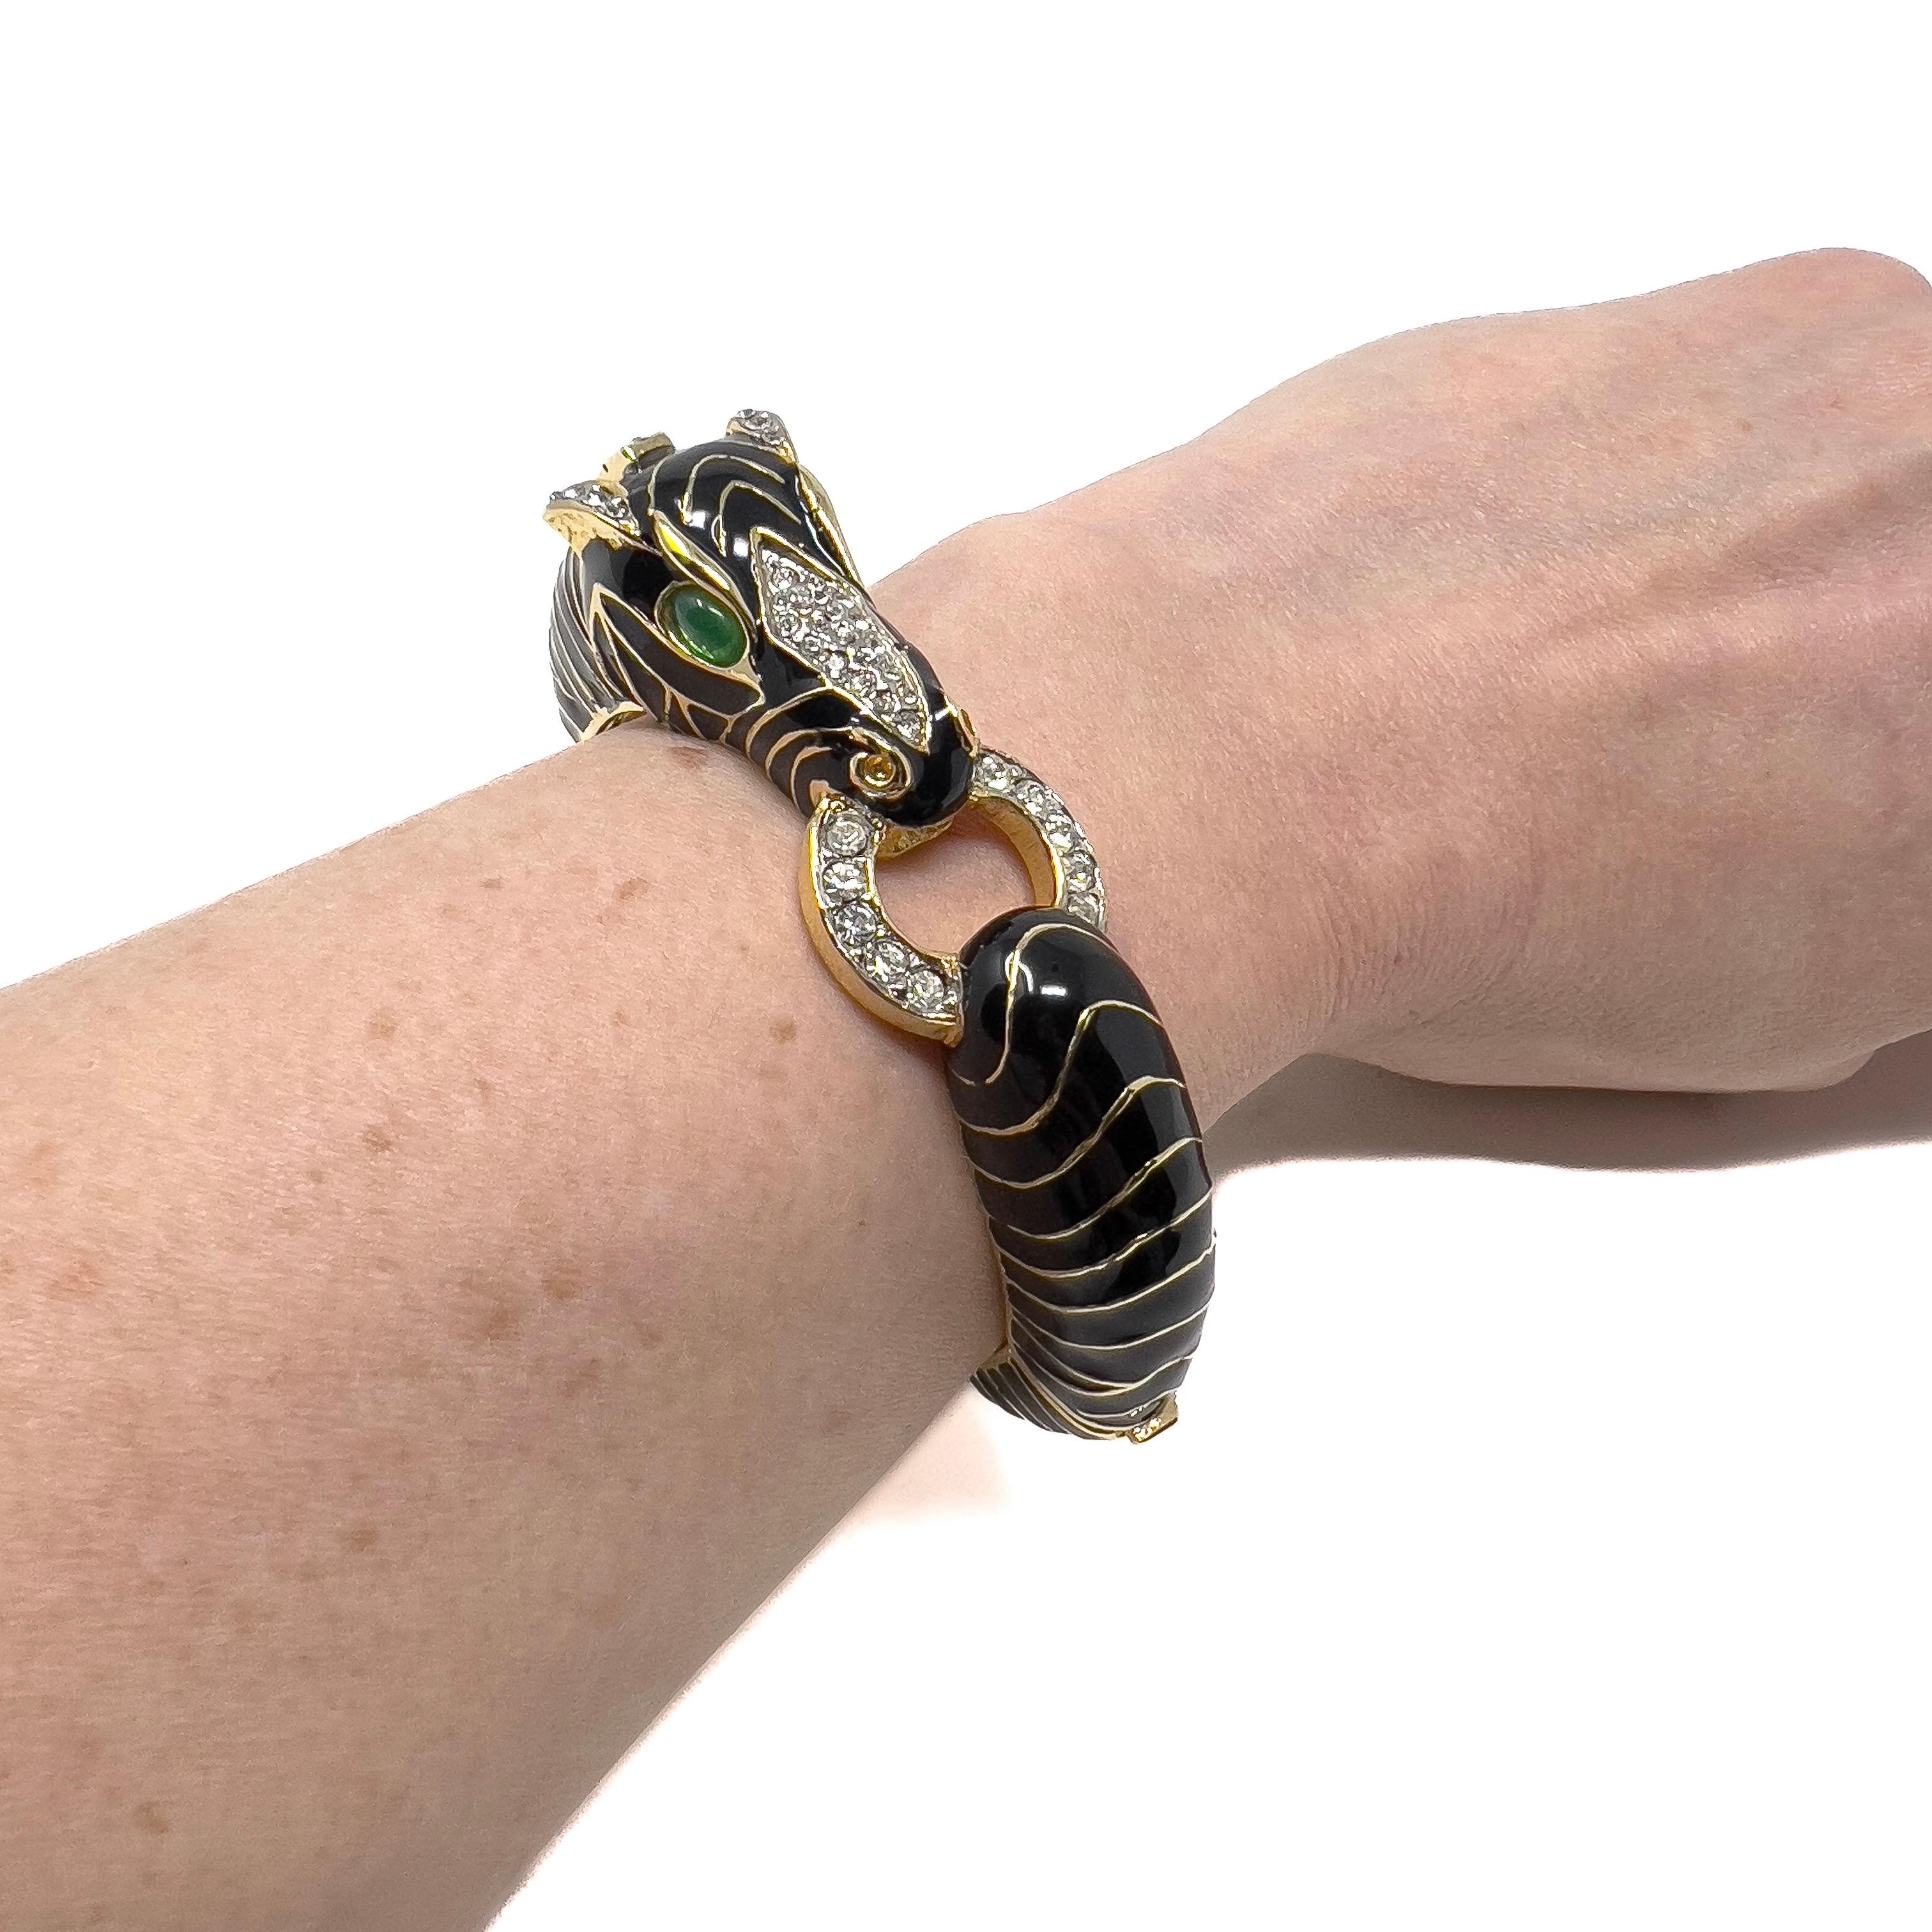 This stylish cuff was made in c.1970 by the American Ciner company. Their animal inspired designs are extremely collectable. 

Condition Report:
Excellent

The Details...
This gold plated, hinged cuff features a zebra design. It is detailed with